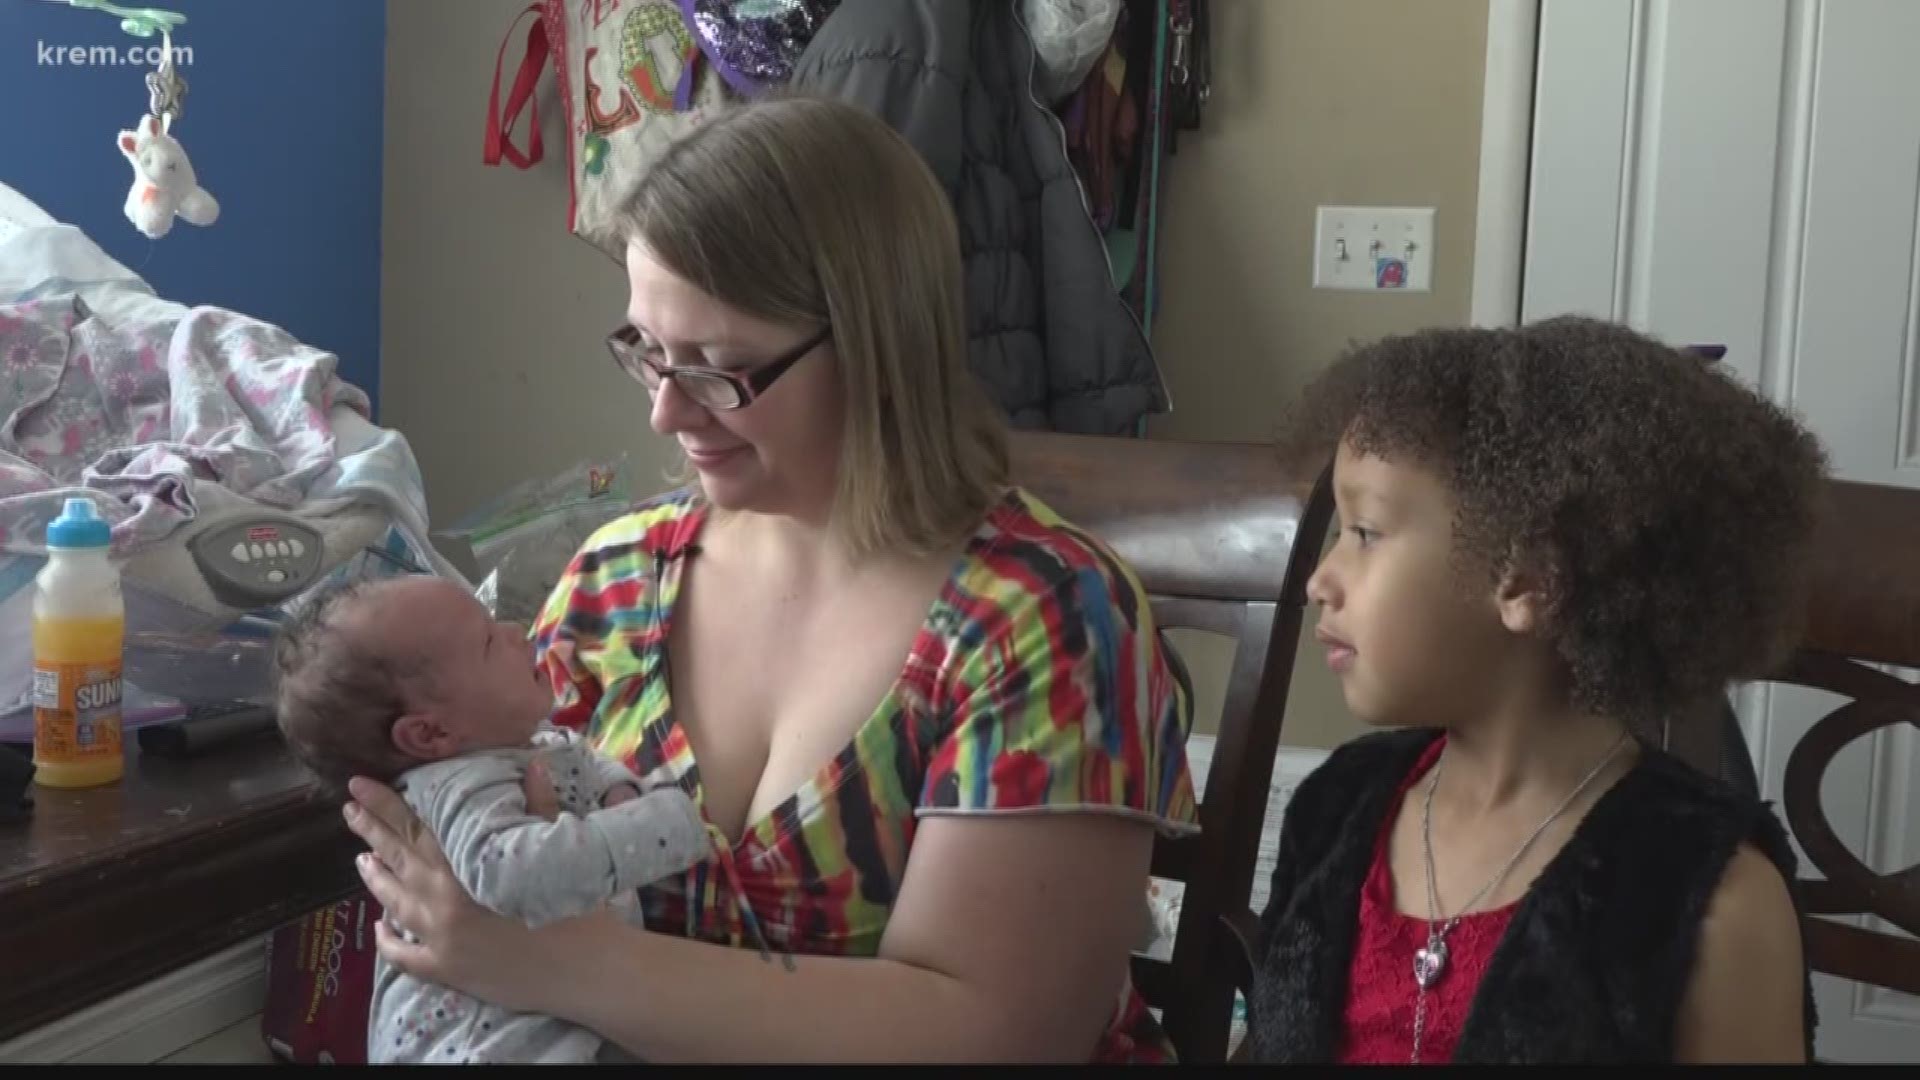 Raising a child can be quite the challenge, especially for parents with low incomes. Tamera McClellan was once in this position, so when her daughter was expecting her first child, she wanted to make sure she had all the items she needed.